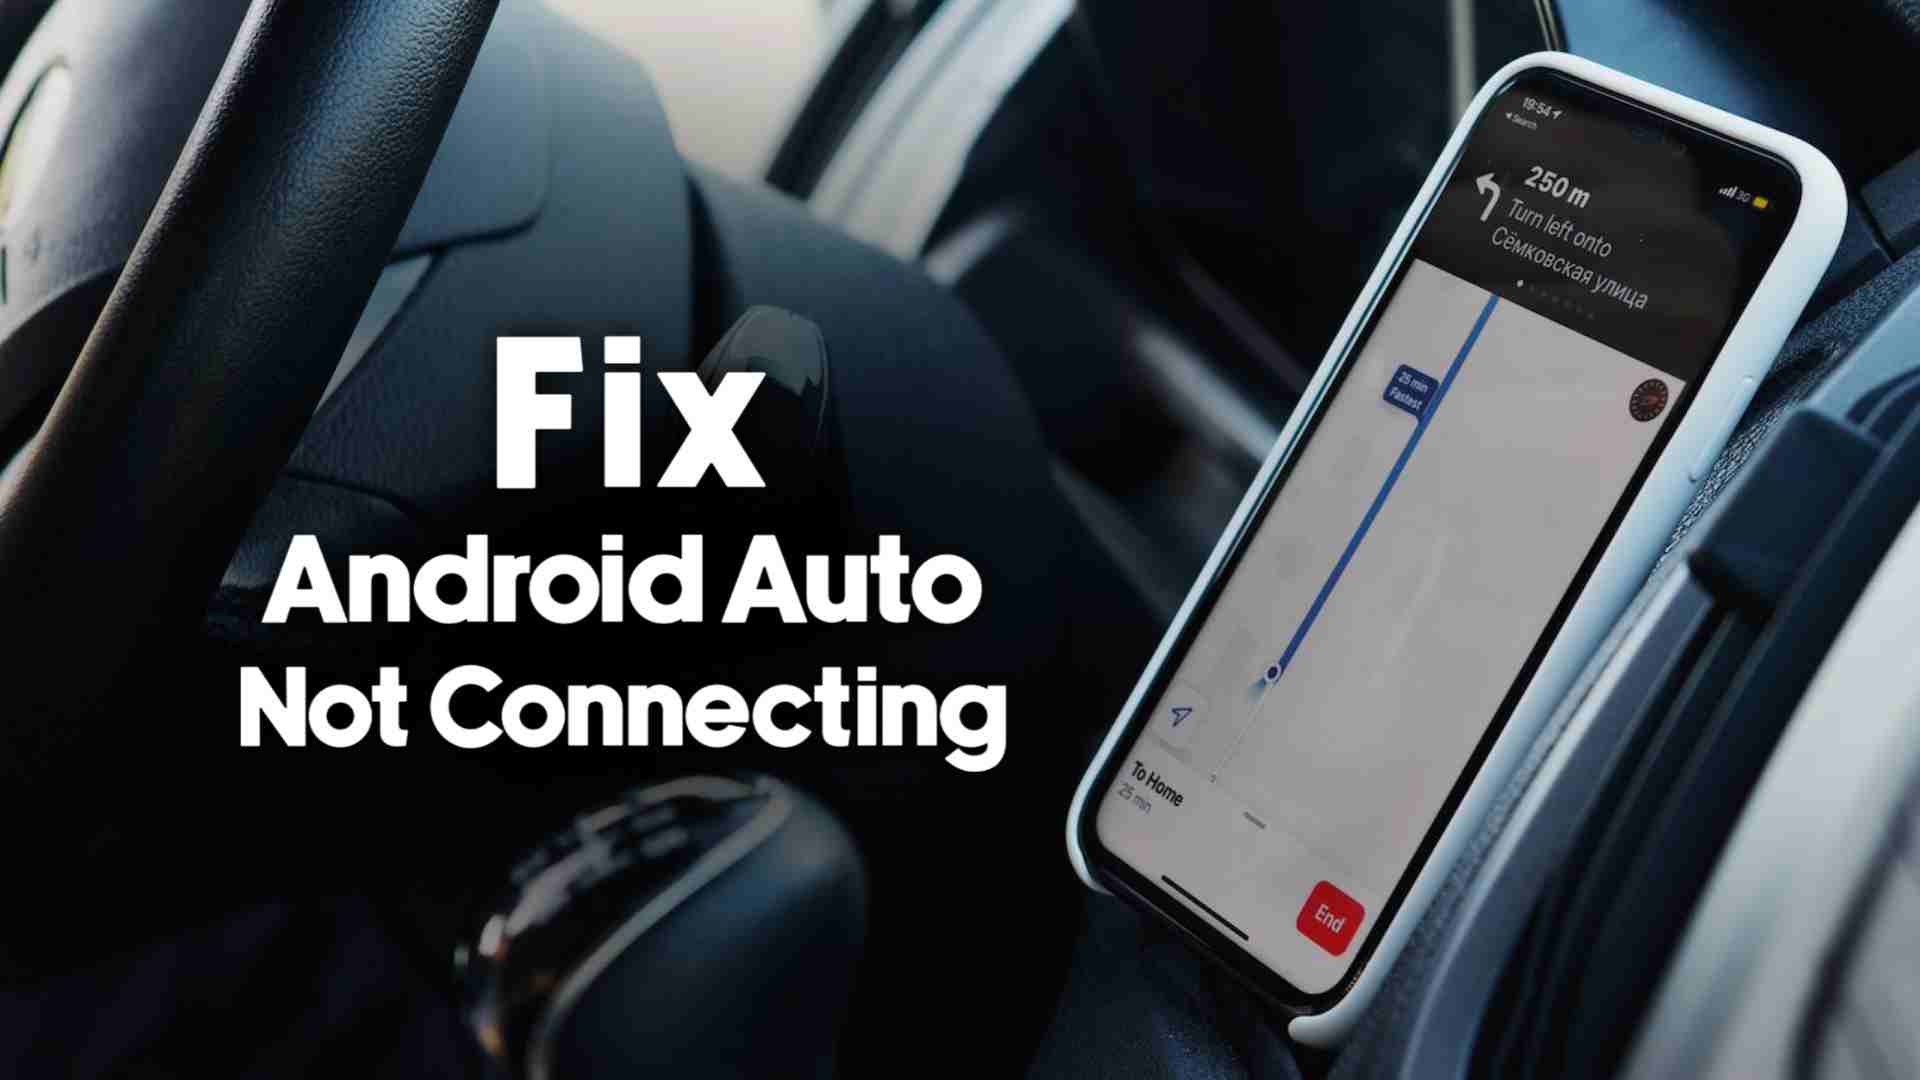 Android Auto not working? Here's how to fix it